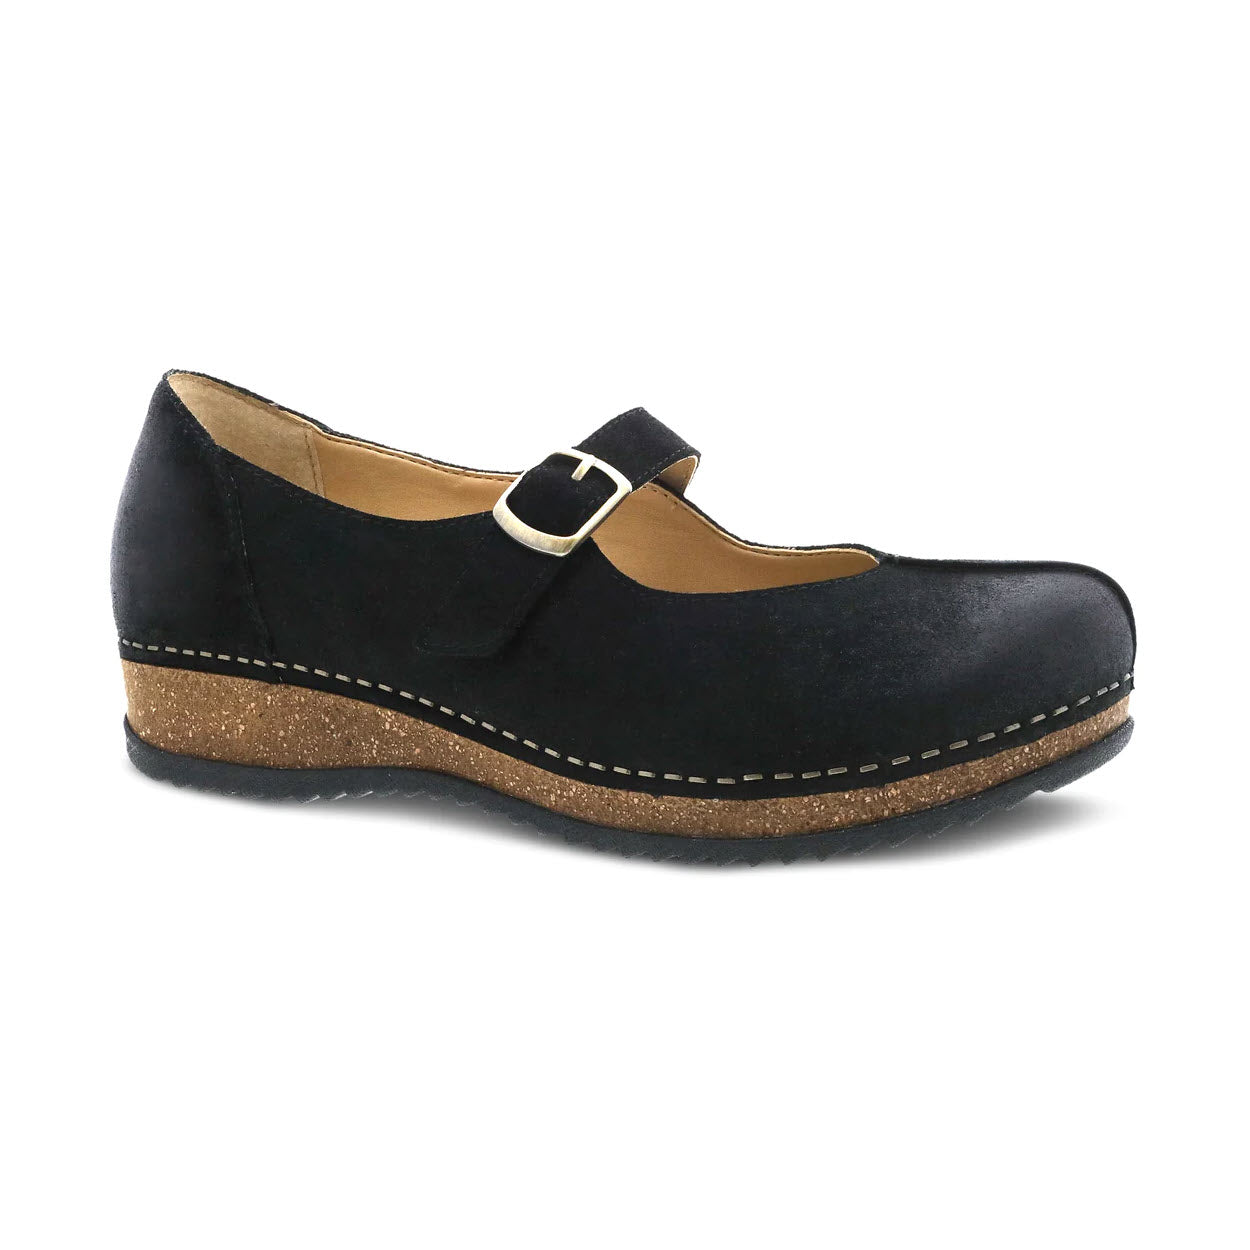 Dansko Mika Black Burnished Suede Mary Jane shoe with buckle and sustainable cork sole, isolated on a white background.